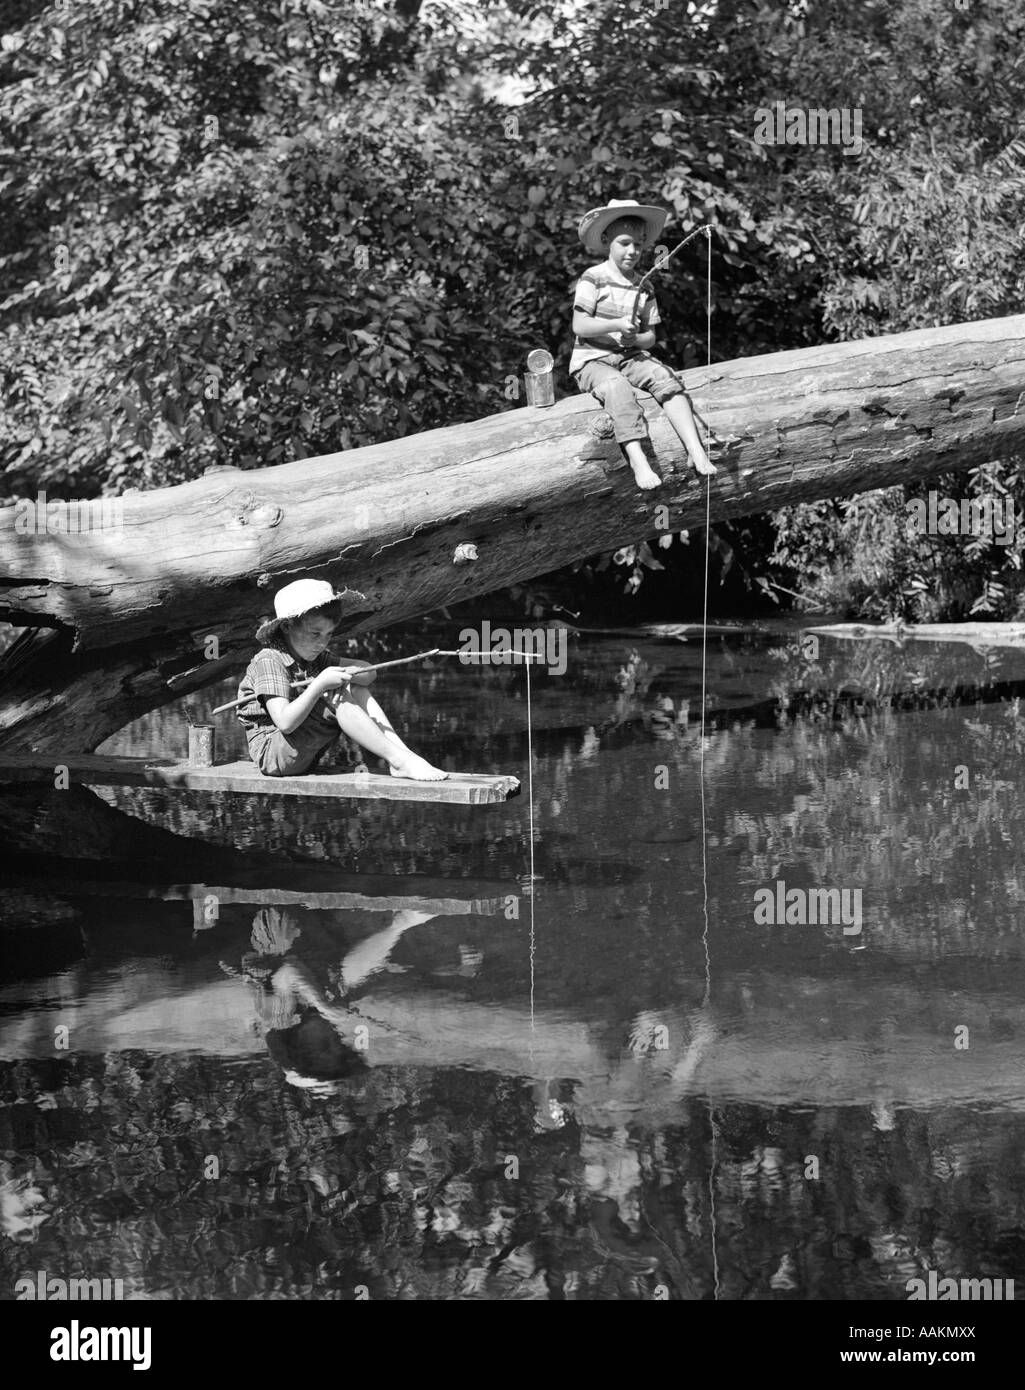 1940s 1950s PAIR OF BOYS IN STRAW HATS & CUFFED JEANS FISHING IN STREAM OFF  OF FALLEN TREE WITH STICK & STRING POLES Stock Photo - Alamy